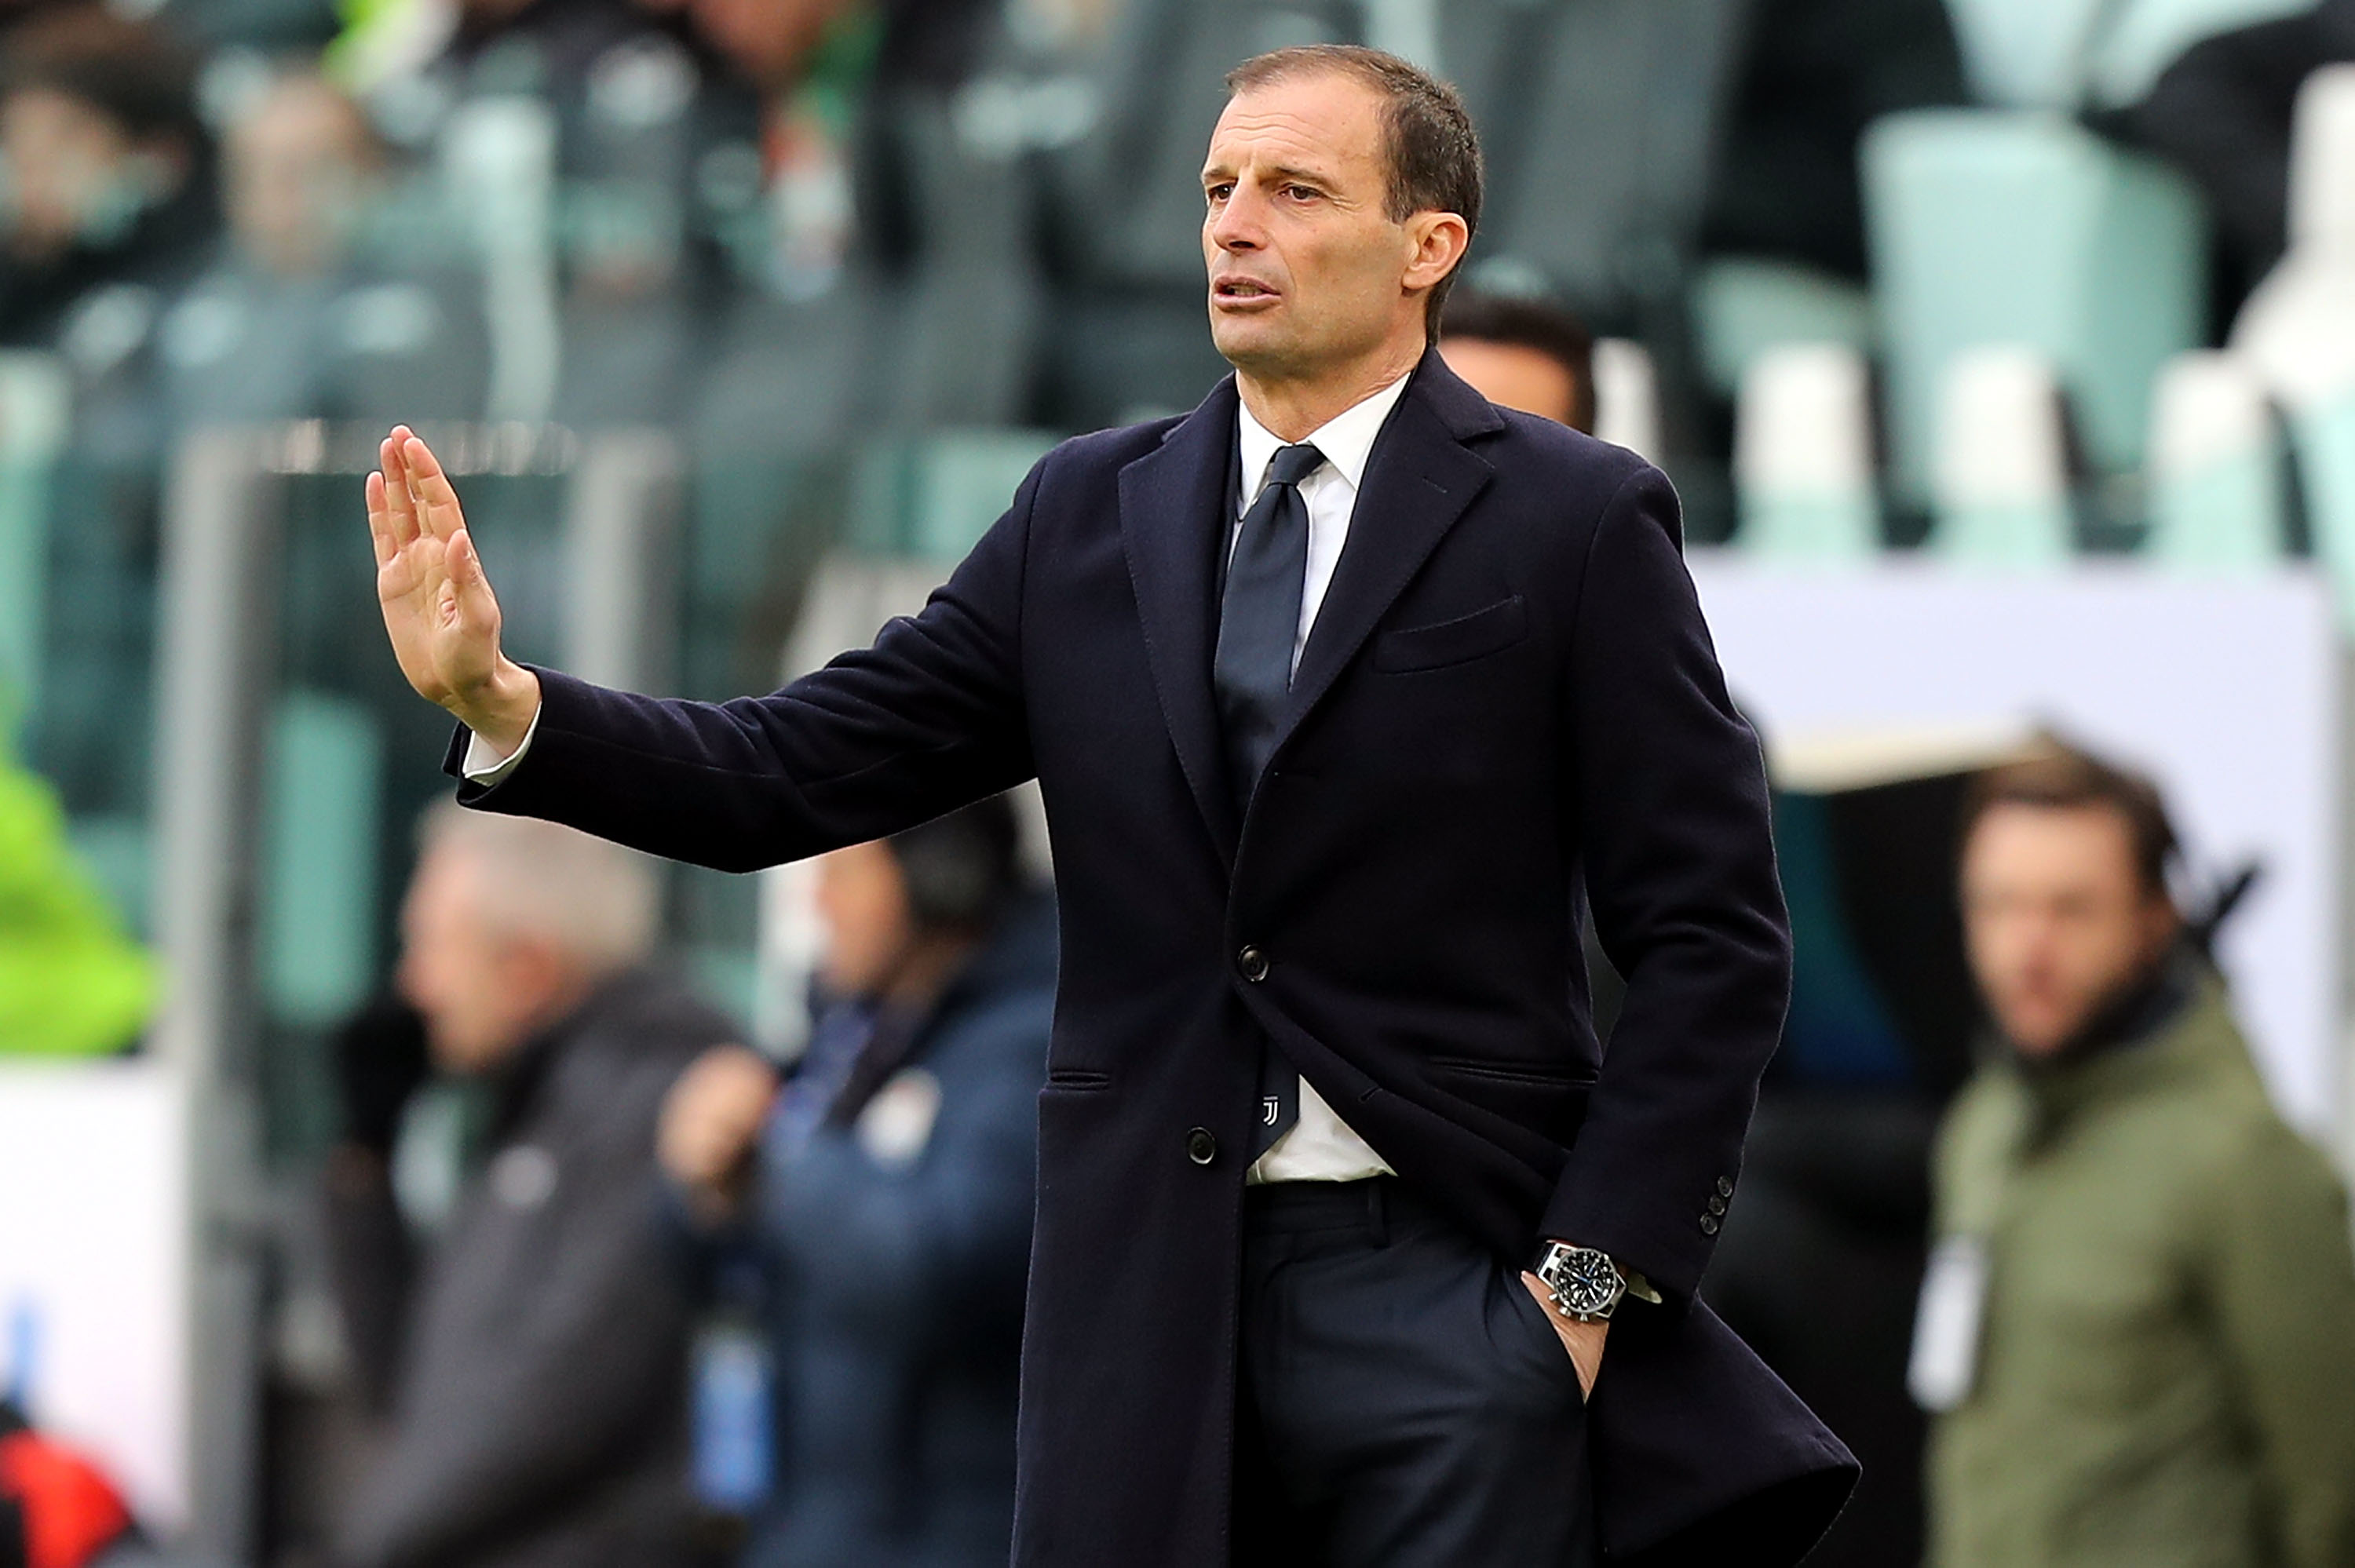 TURIN, ITALY - FEBRUARY 04: Massimiliano Allegri manager of Juventus FC gives instructions during the serie A match between Juventus and US Sassuolo on February 4, 2018 in Turin, Italy.  (Photo by Gabriele Maltinti/Getty Images)